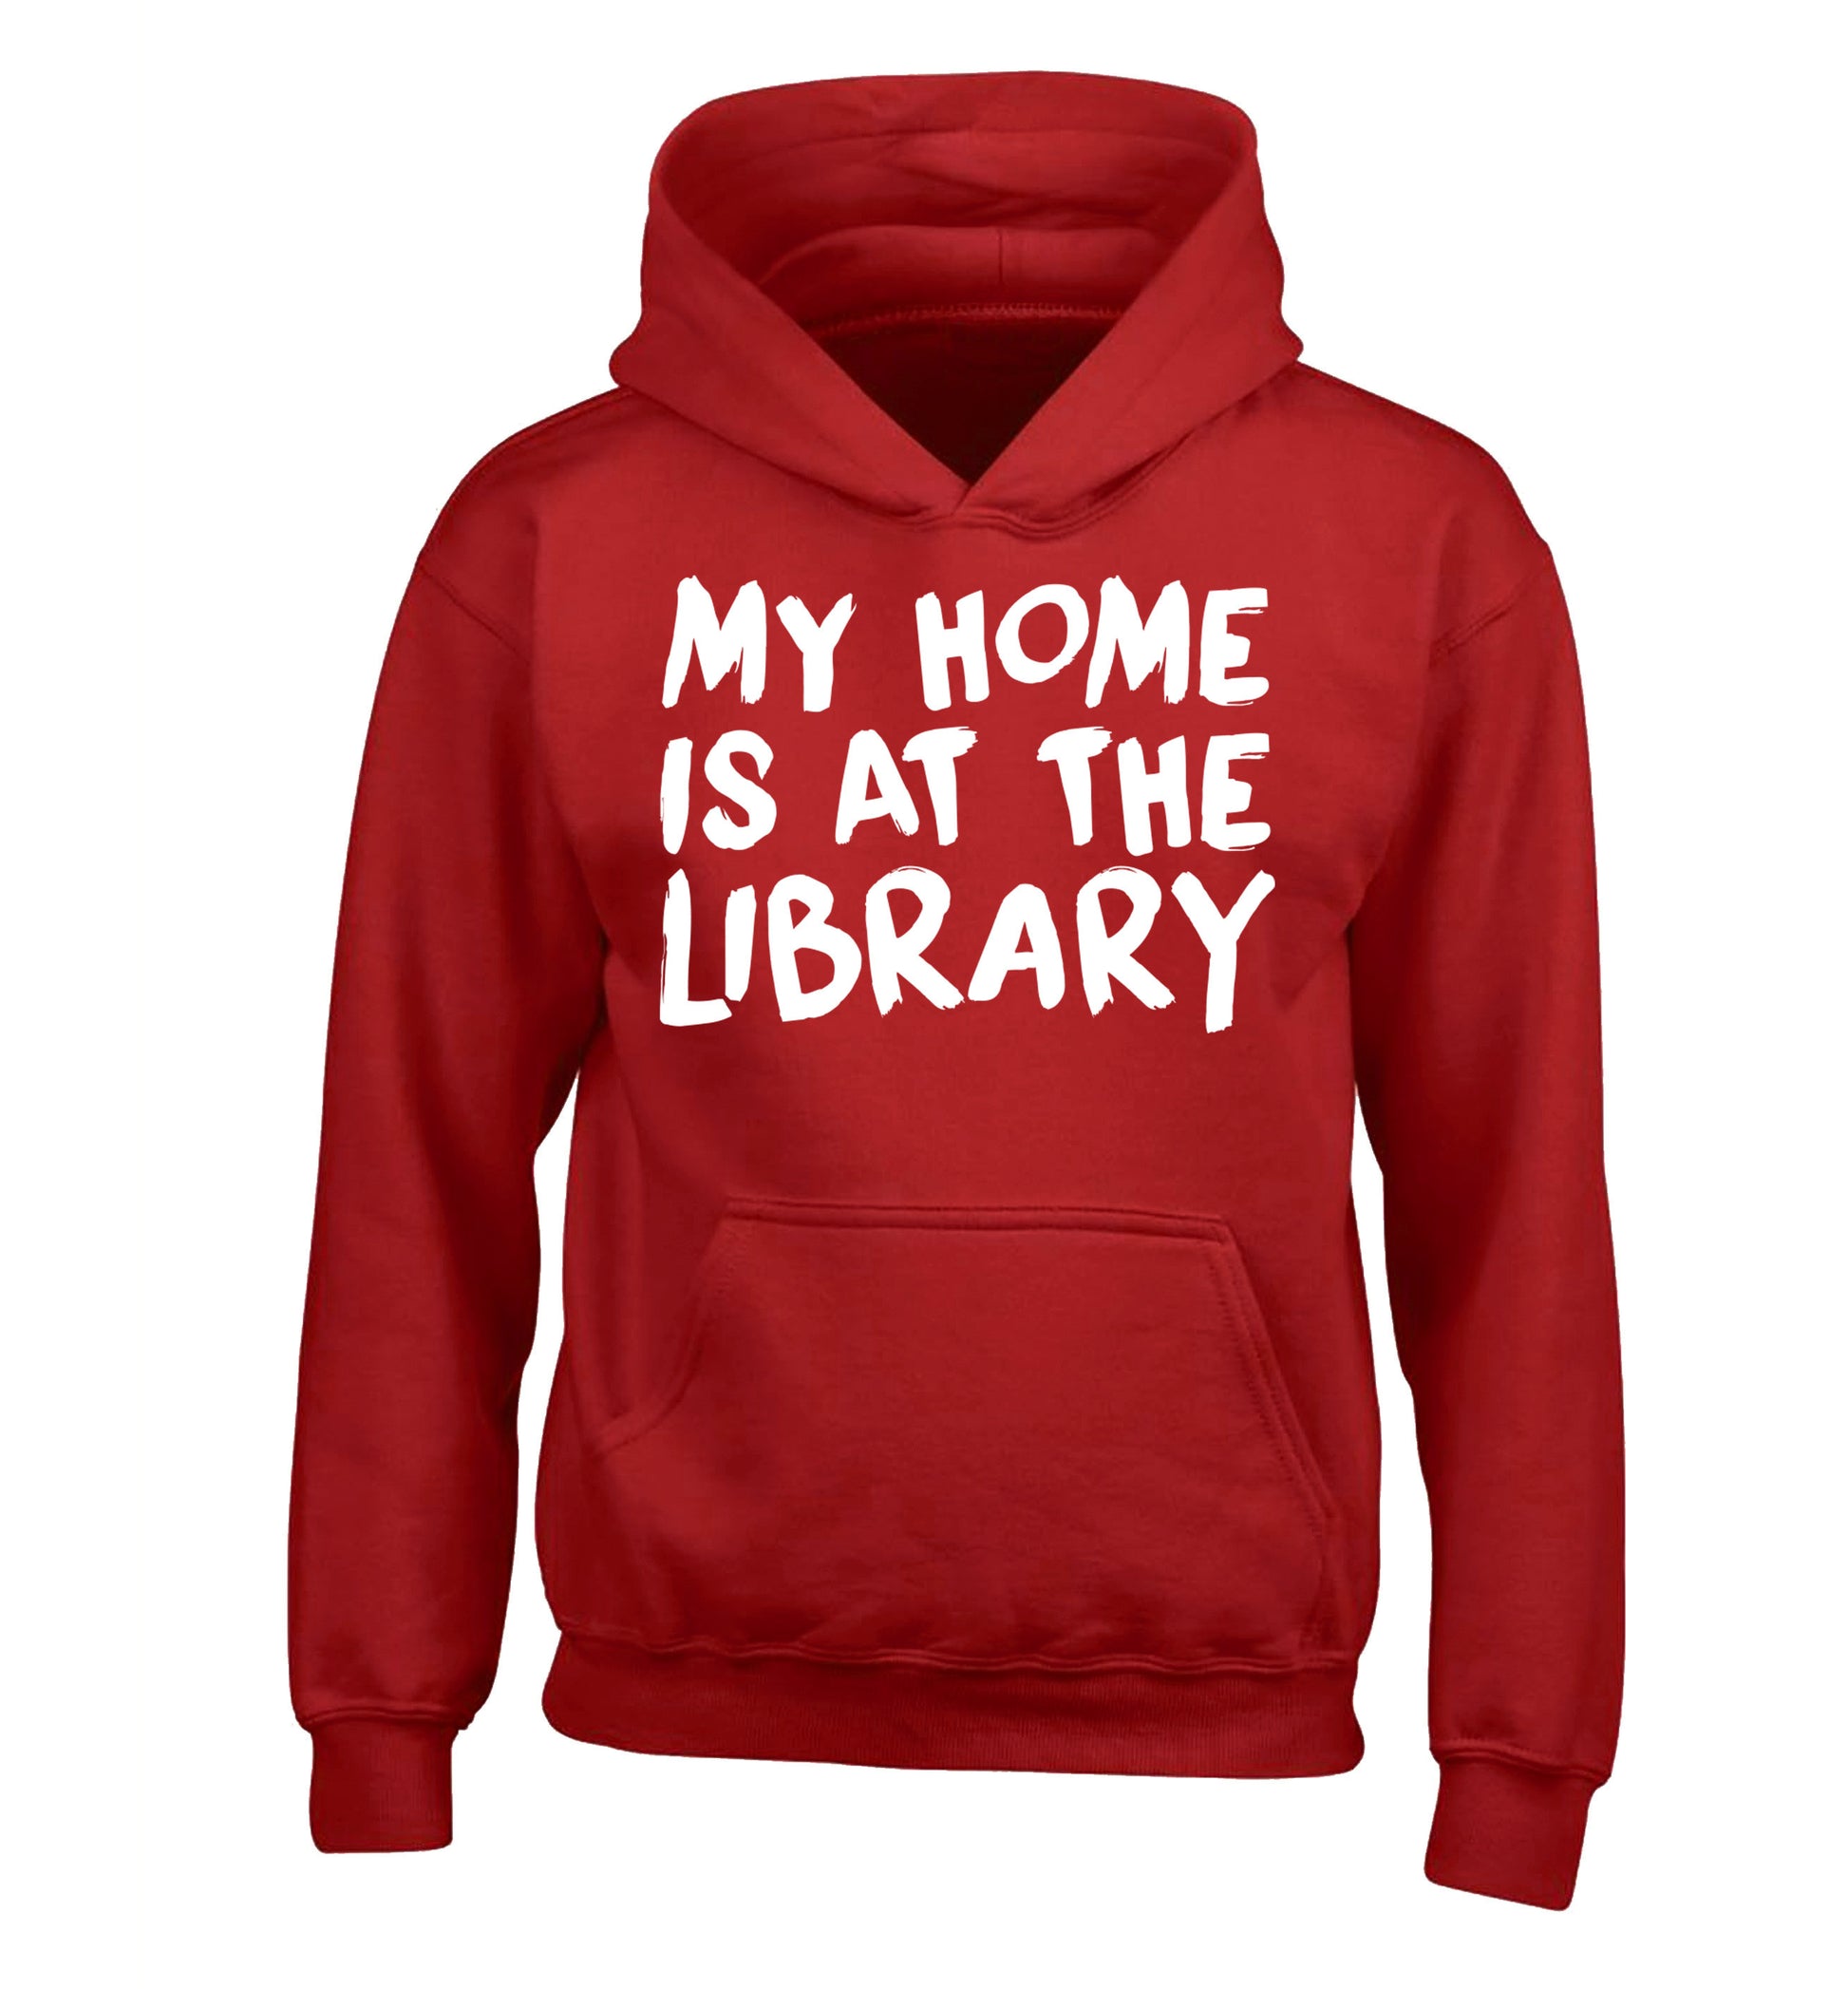 My home is at the library children's red hoodie 12-14 Years